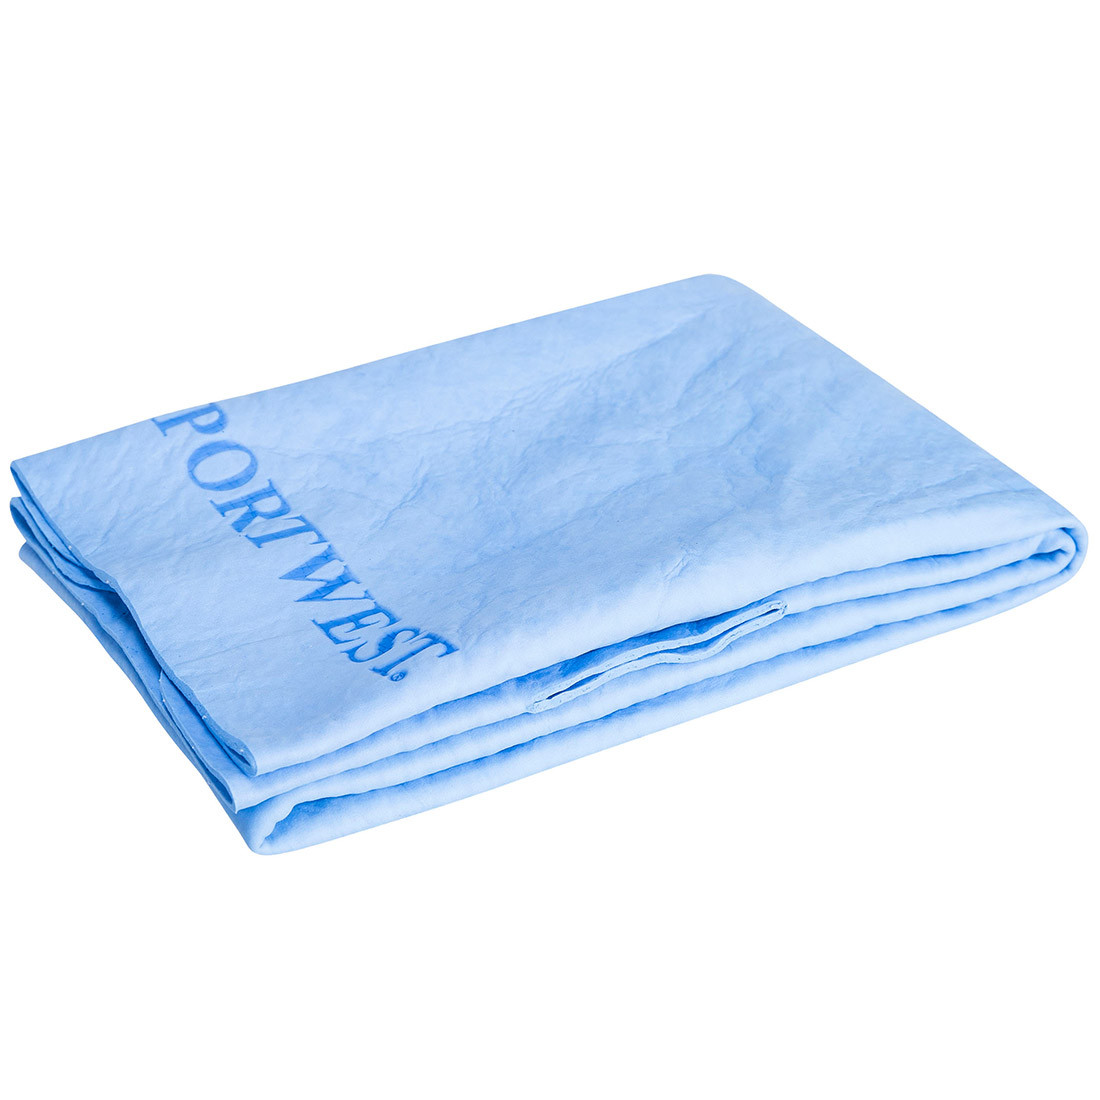 Cooling Towel - Personal protection